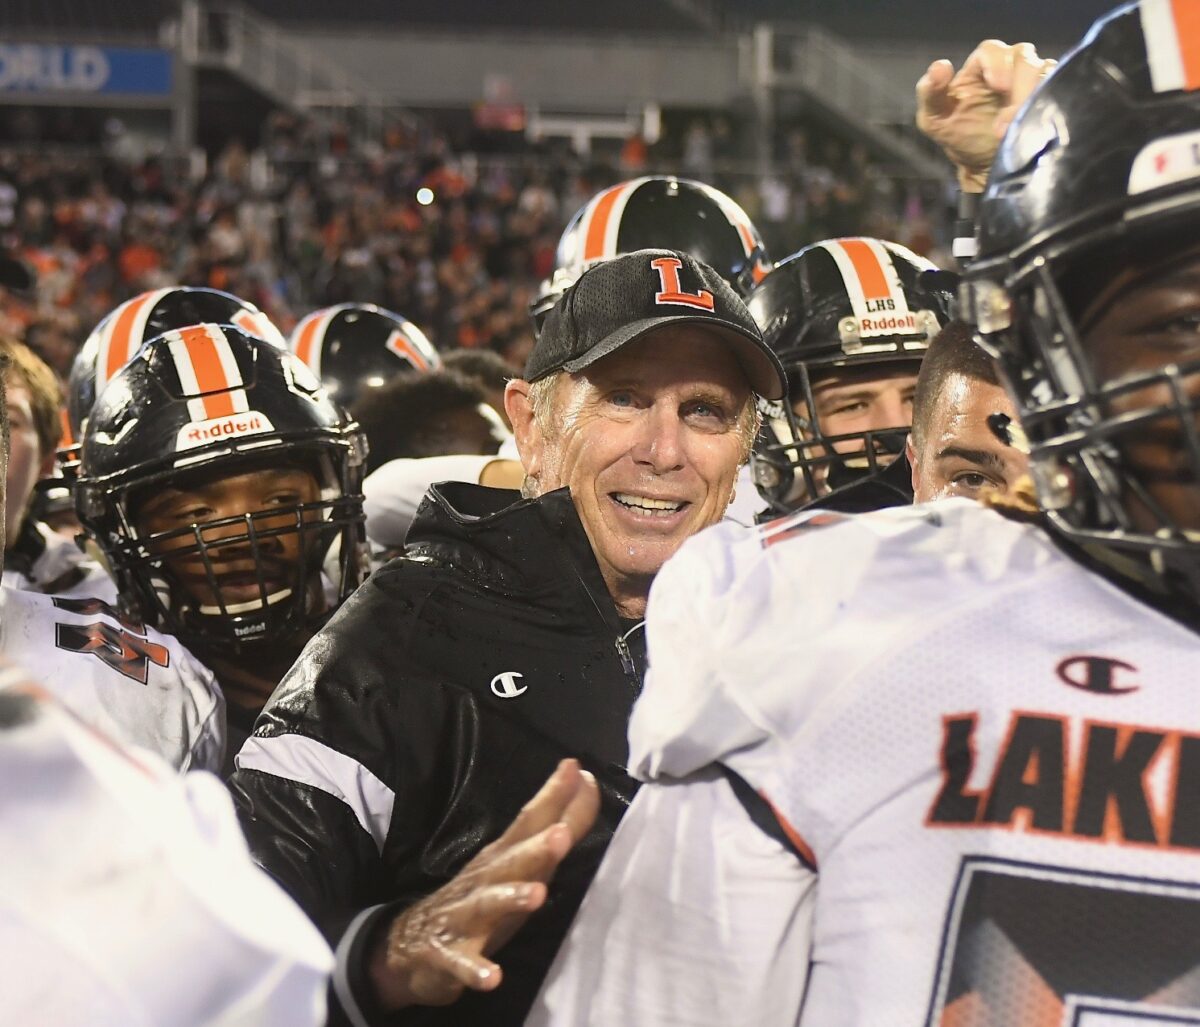 Lakeland (Fla.) football coach Bill Castle retires after 8th state title